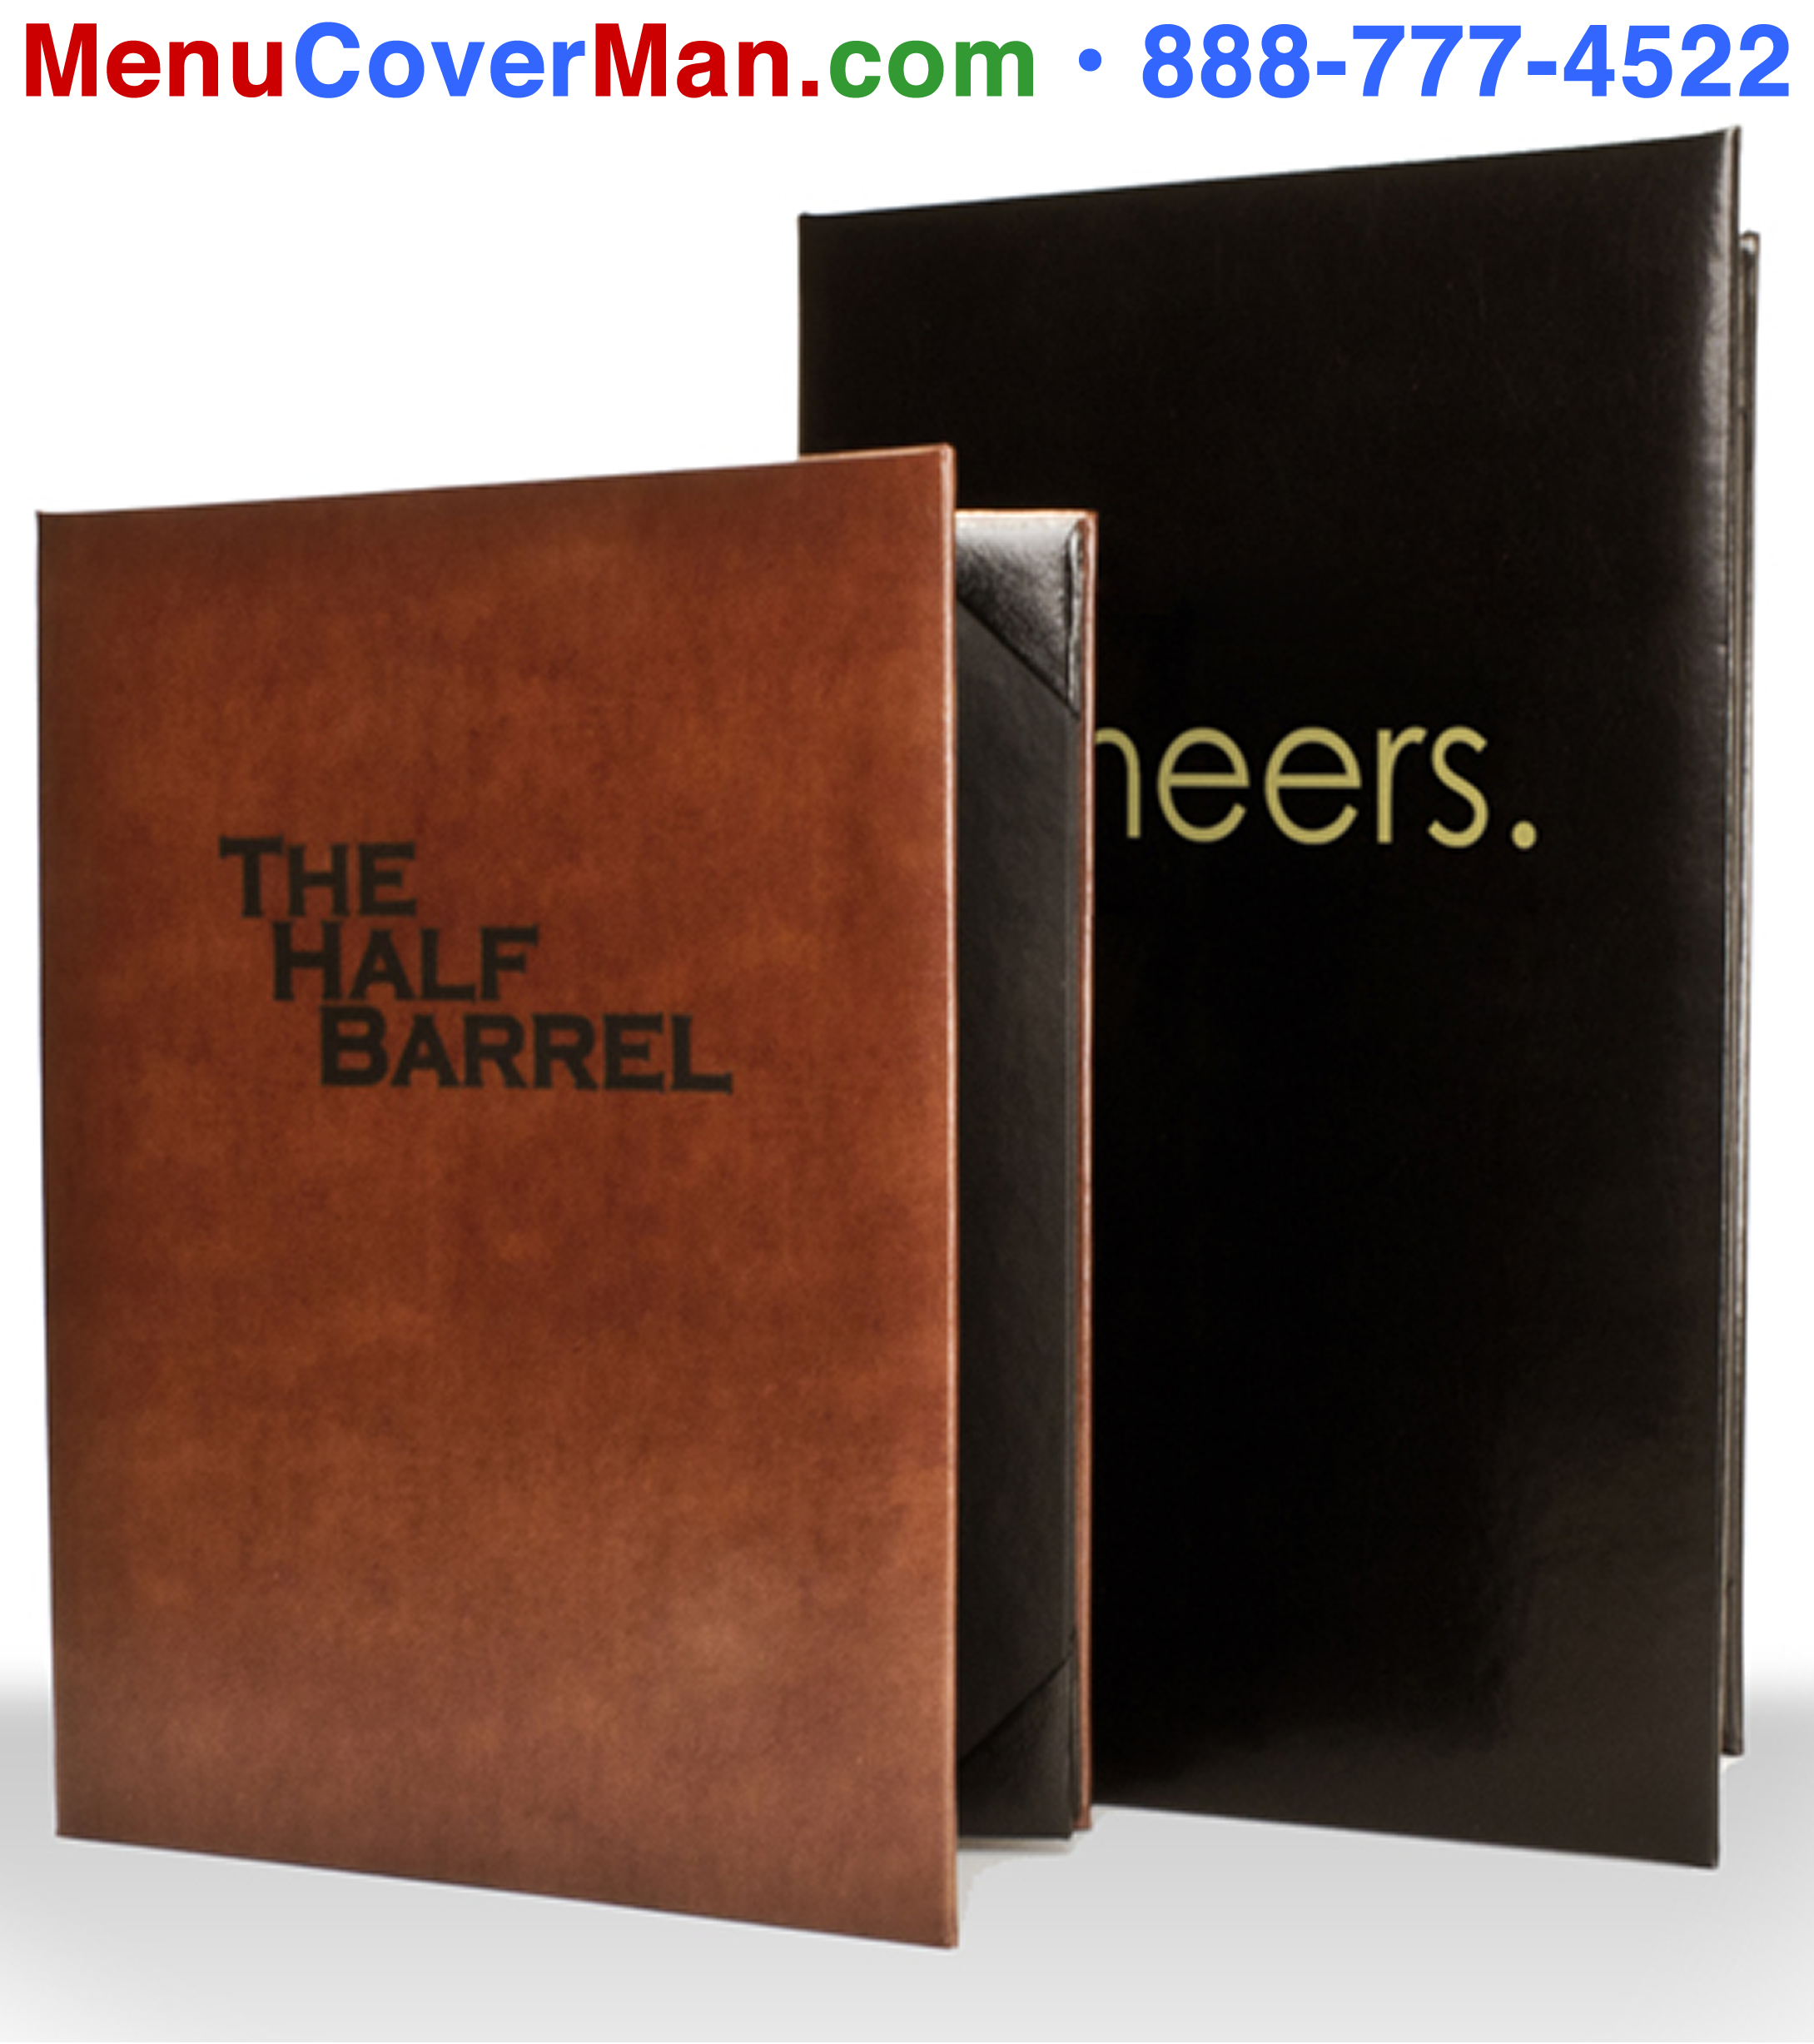 Genuine leather has an appeal like no other menu cover.